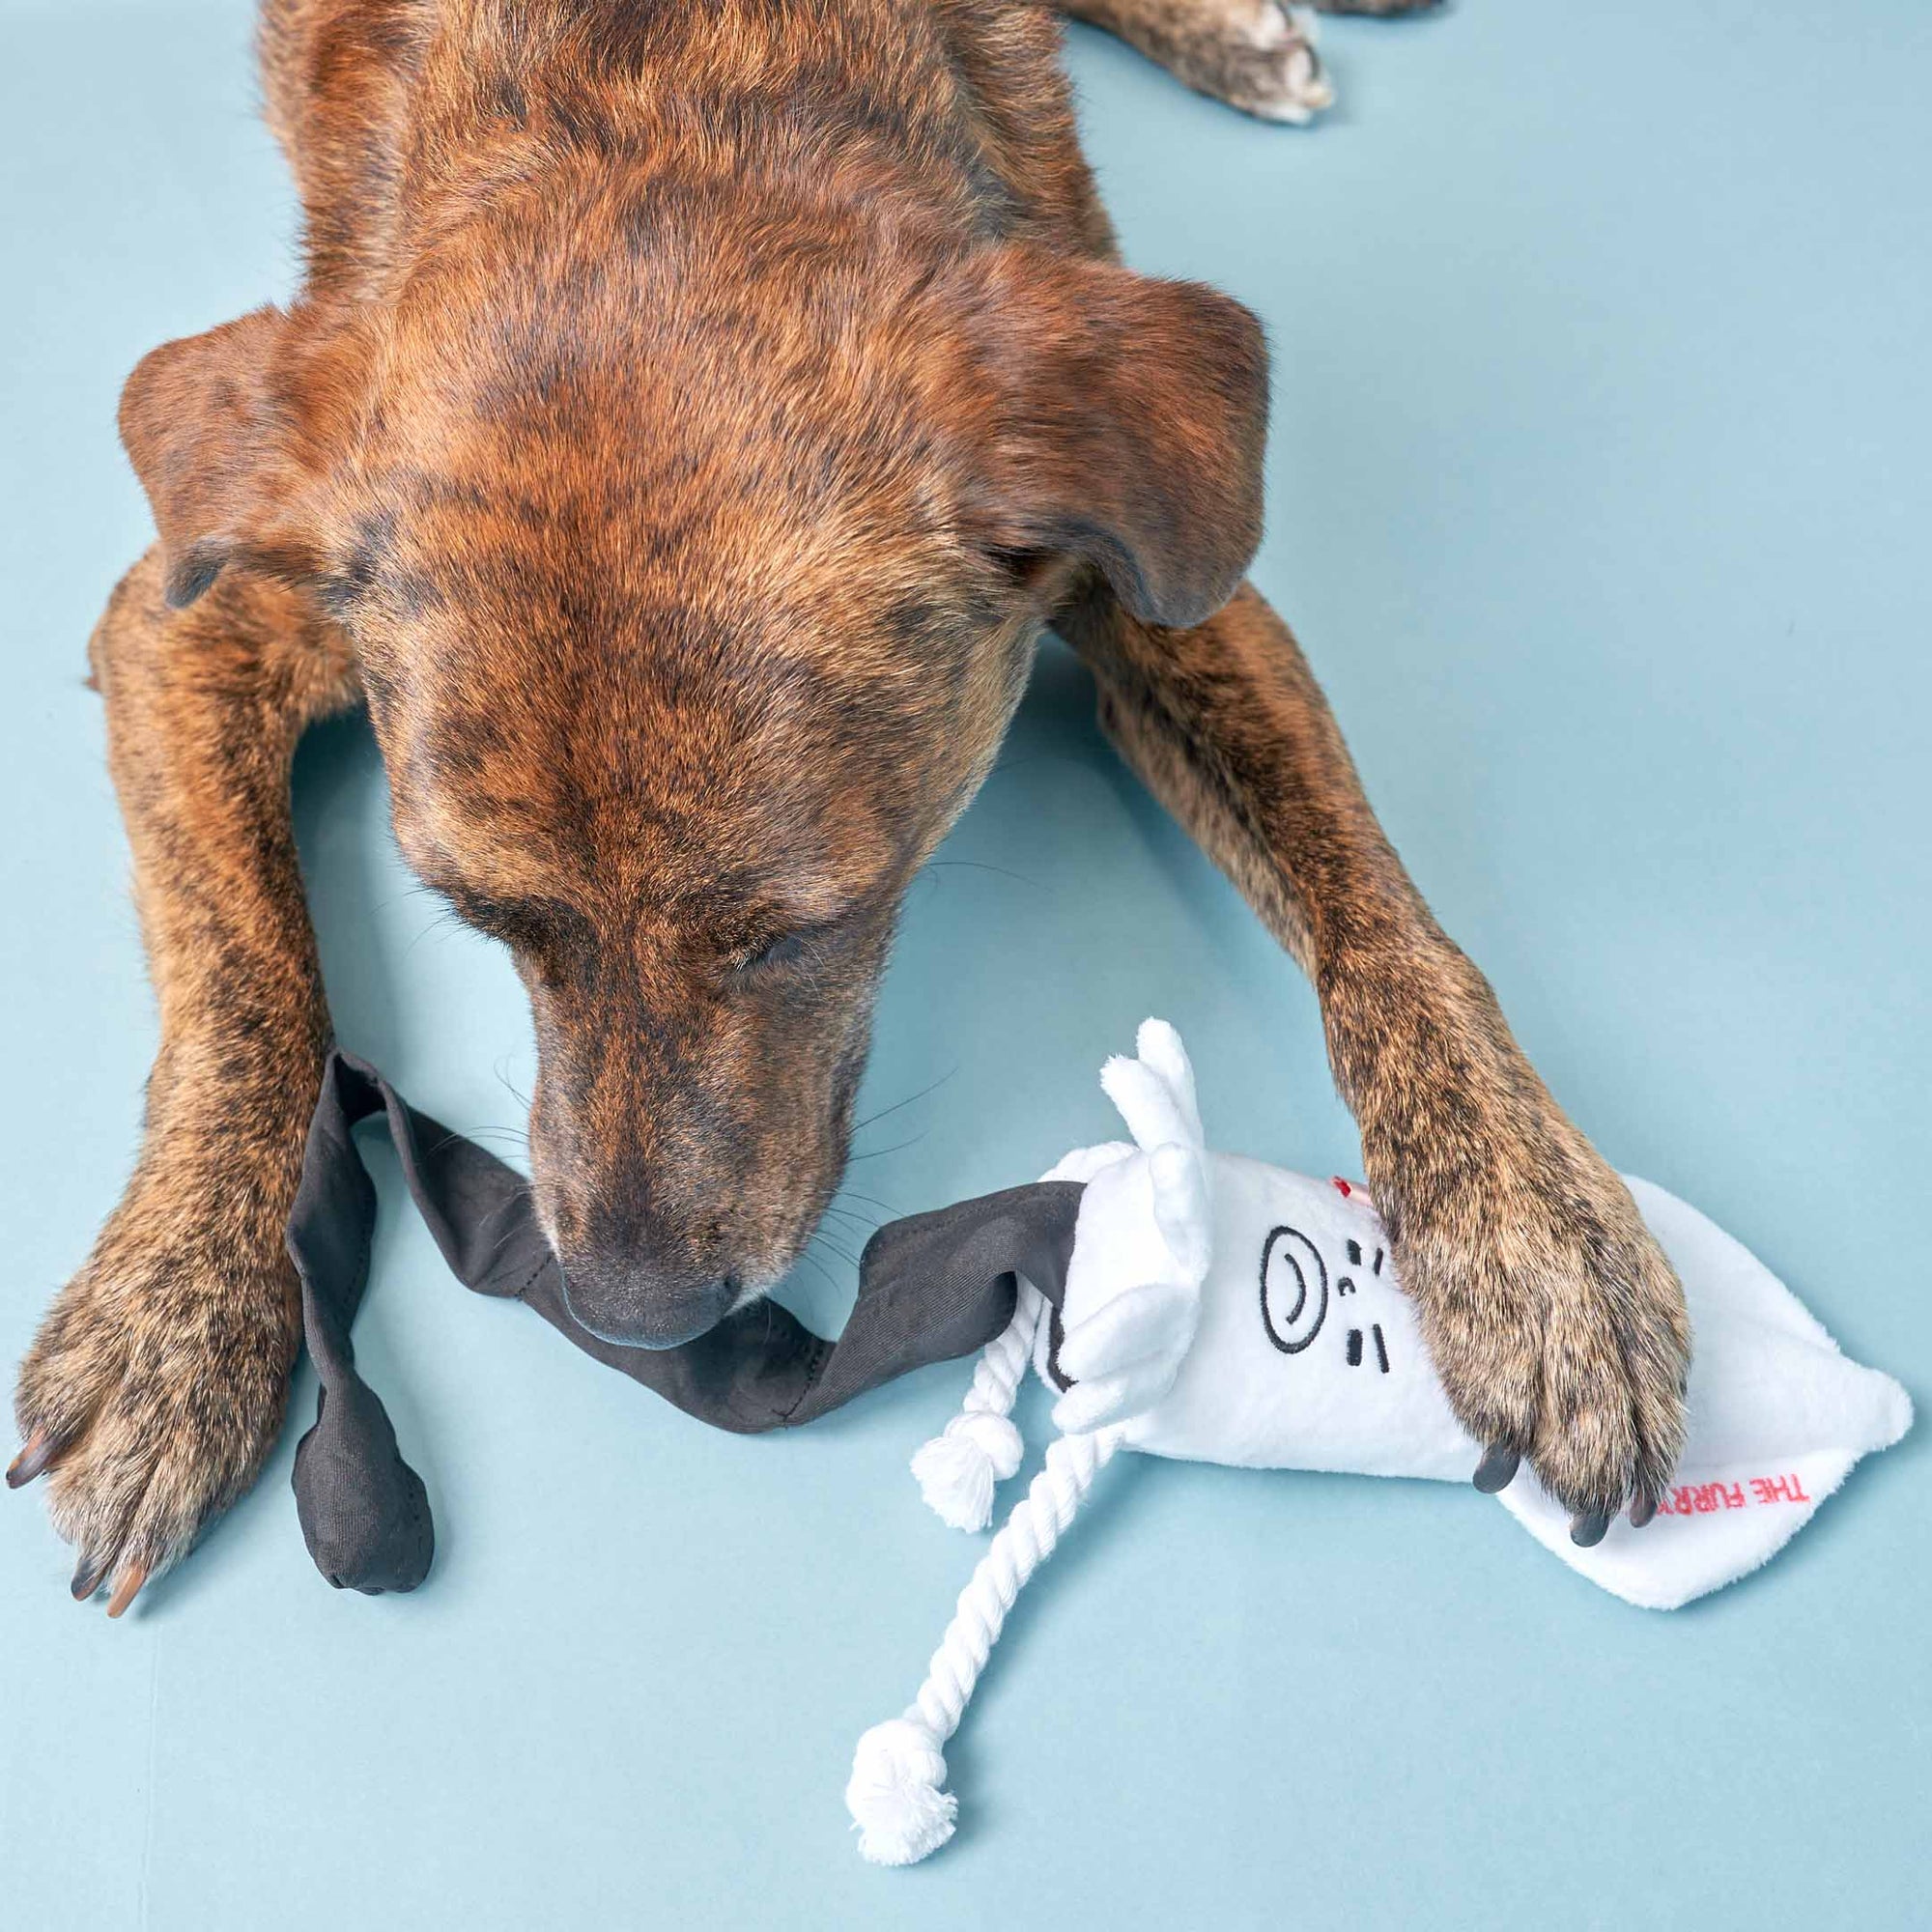 Brindle dog lying down, chewing a playful white squid plush toy.